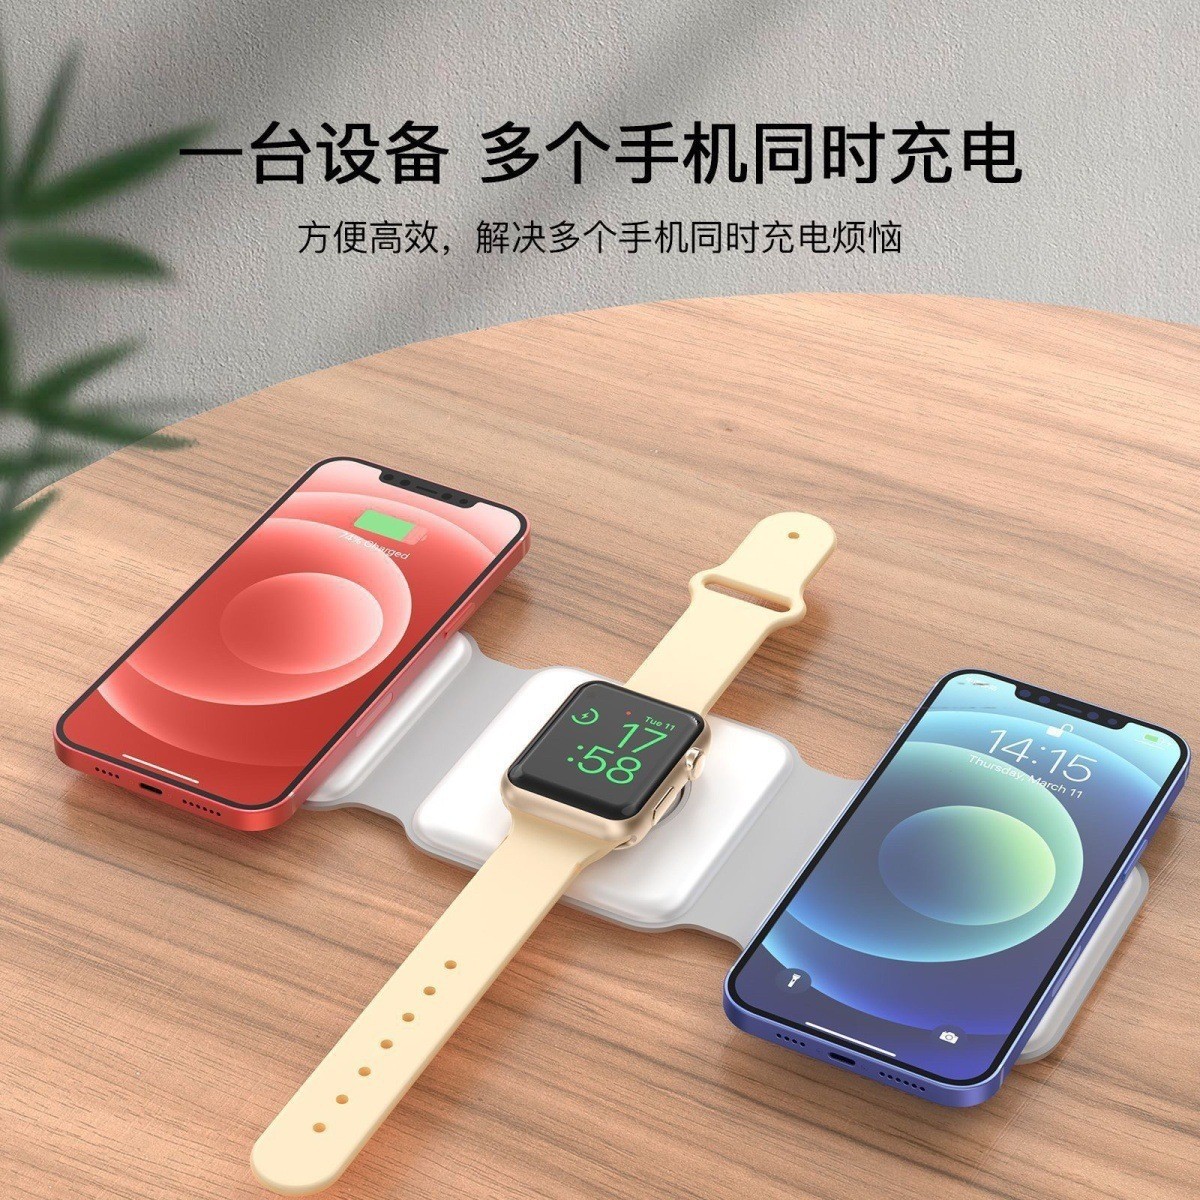 Popular Three-in-One Magnetic Suction Wireless Charger Folding Magnetic Suction 15W Fast Charge Wireless Phone Charger Wireless Charger Electrical Universal